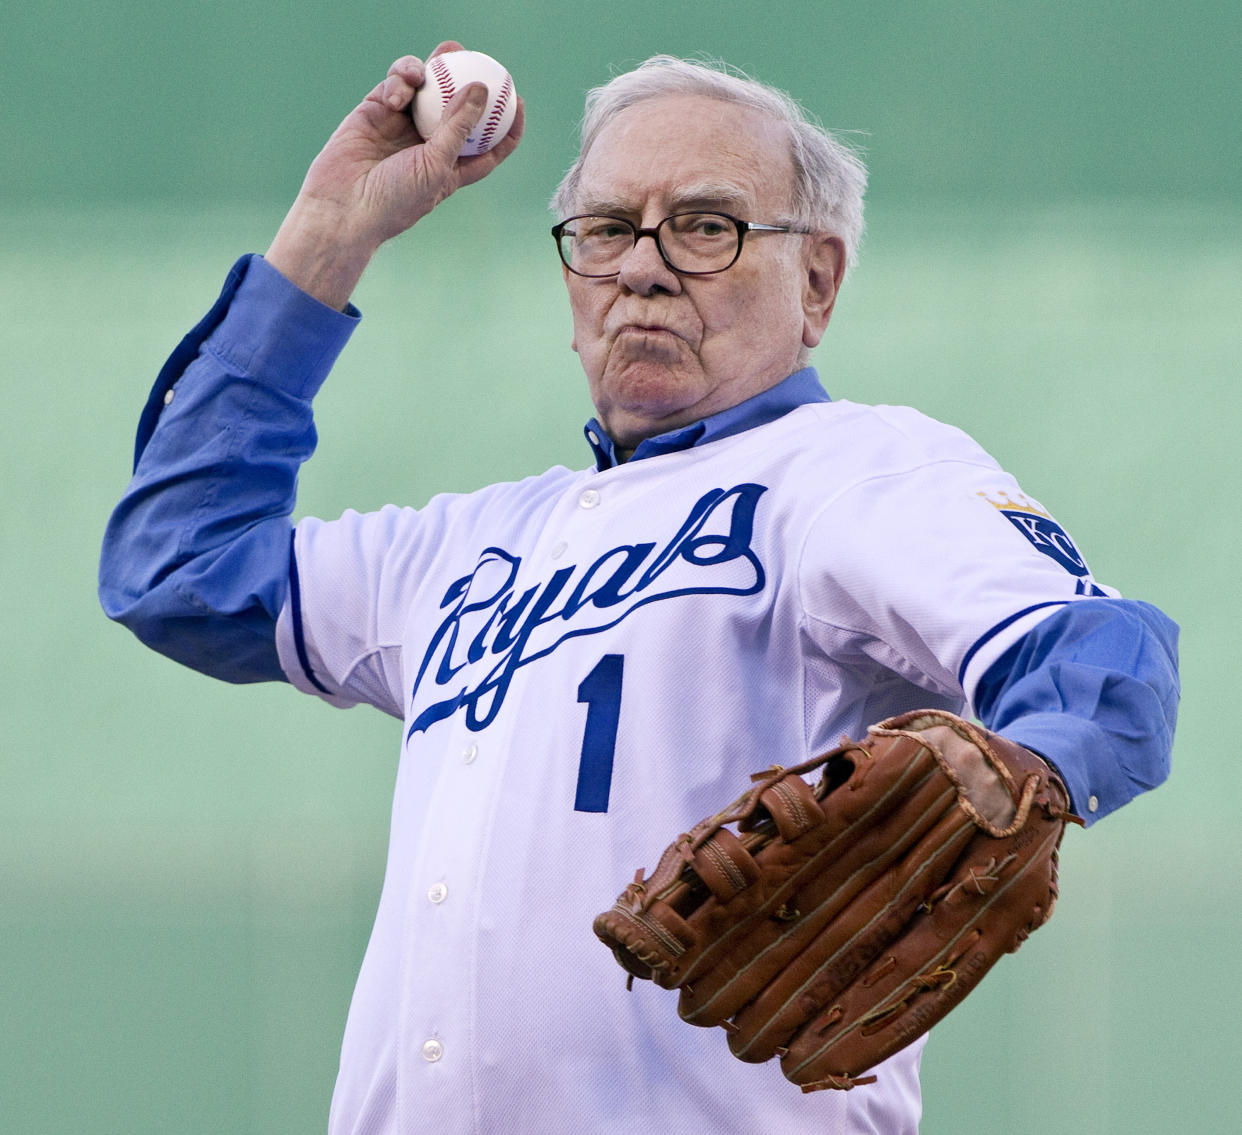 Berkshire Hathaway's Chairman Warren Buffett throws out the ceremonial first pitch before the Kansas City Royals play host to the Houston Astros at Kauffman Stadium in Kansas City Missouri, on Thursday, June 17, 2010.  (Photo by John Sleezer/Kansas City Star/Tribune News Service via Getty Images)